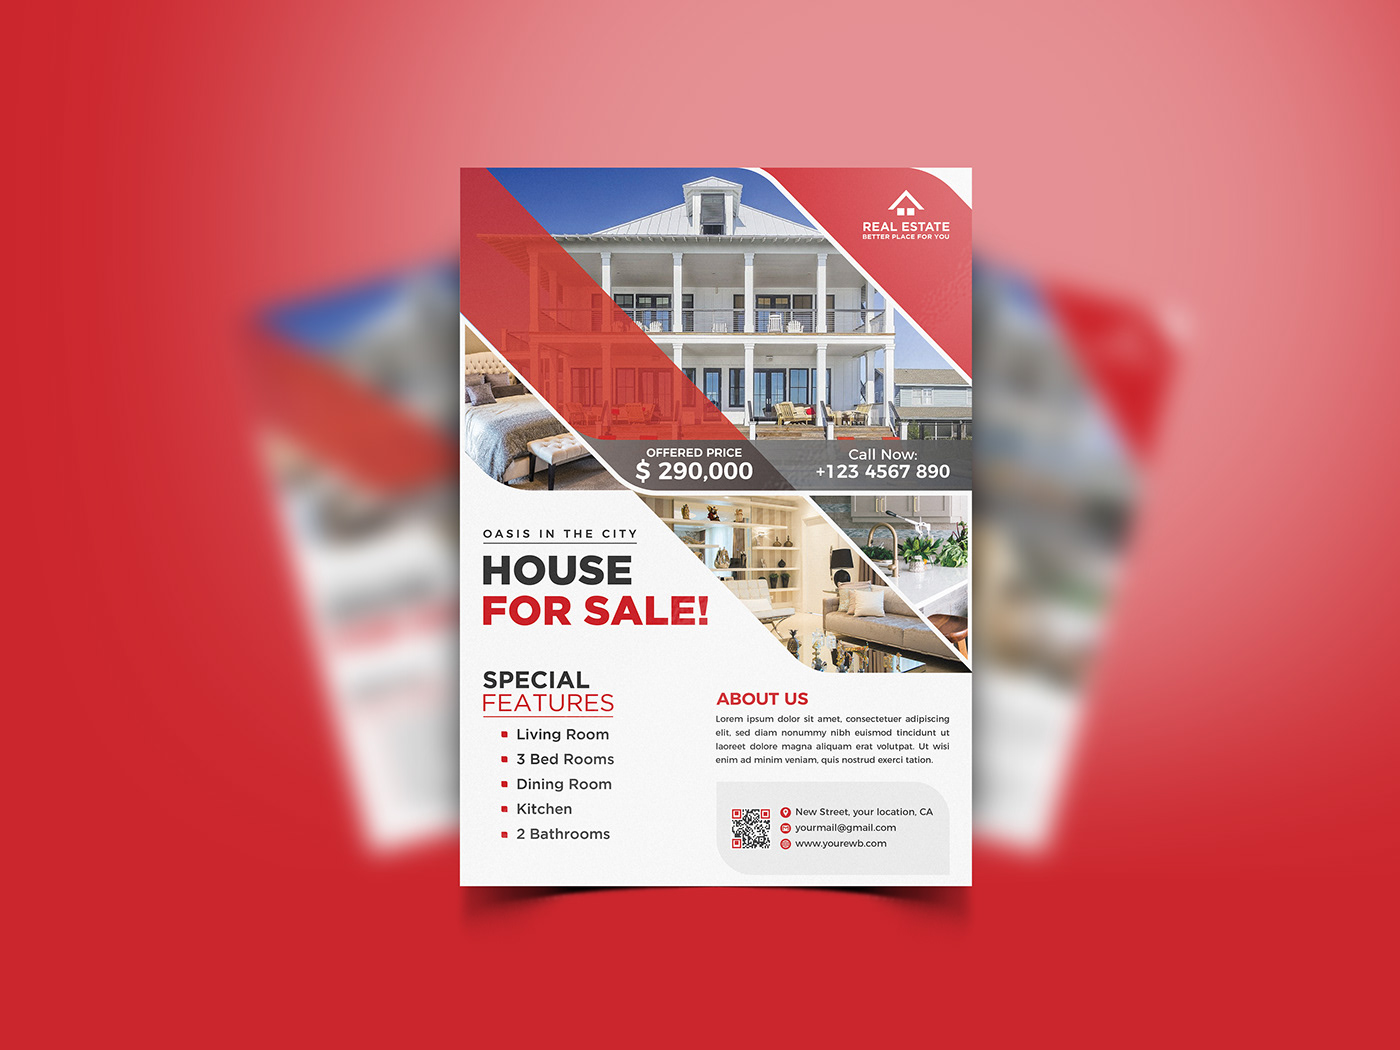 This is a creative real estate flyer design template.